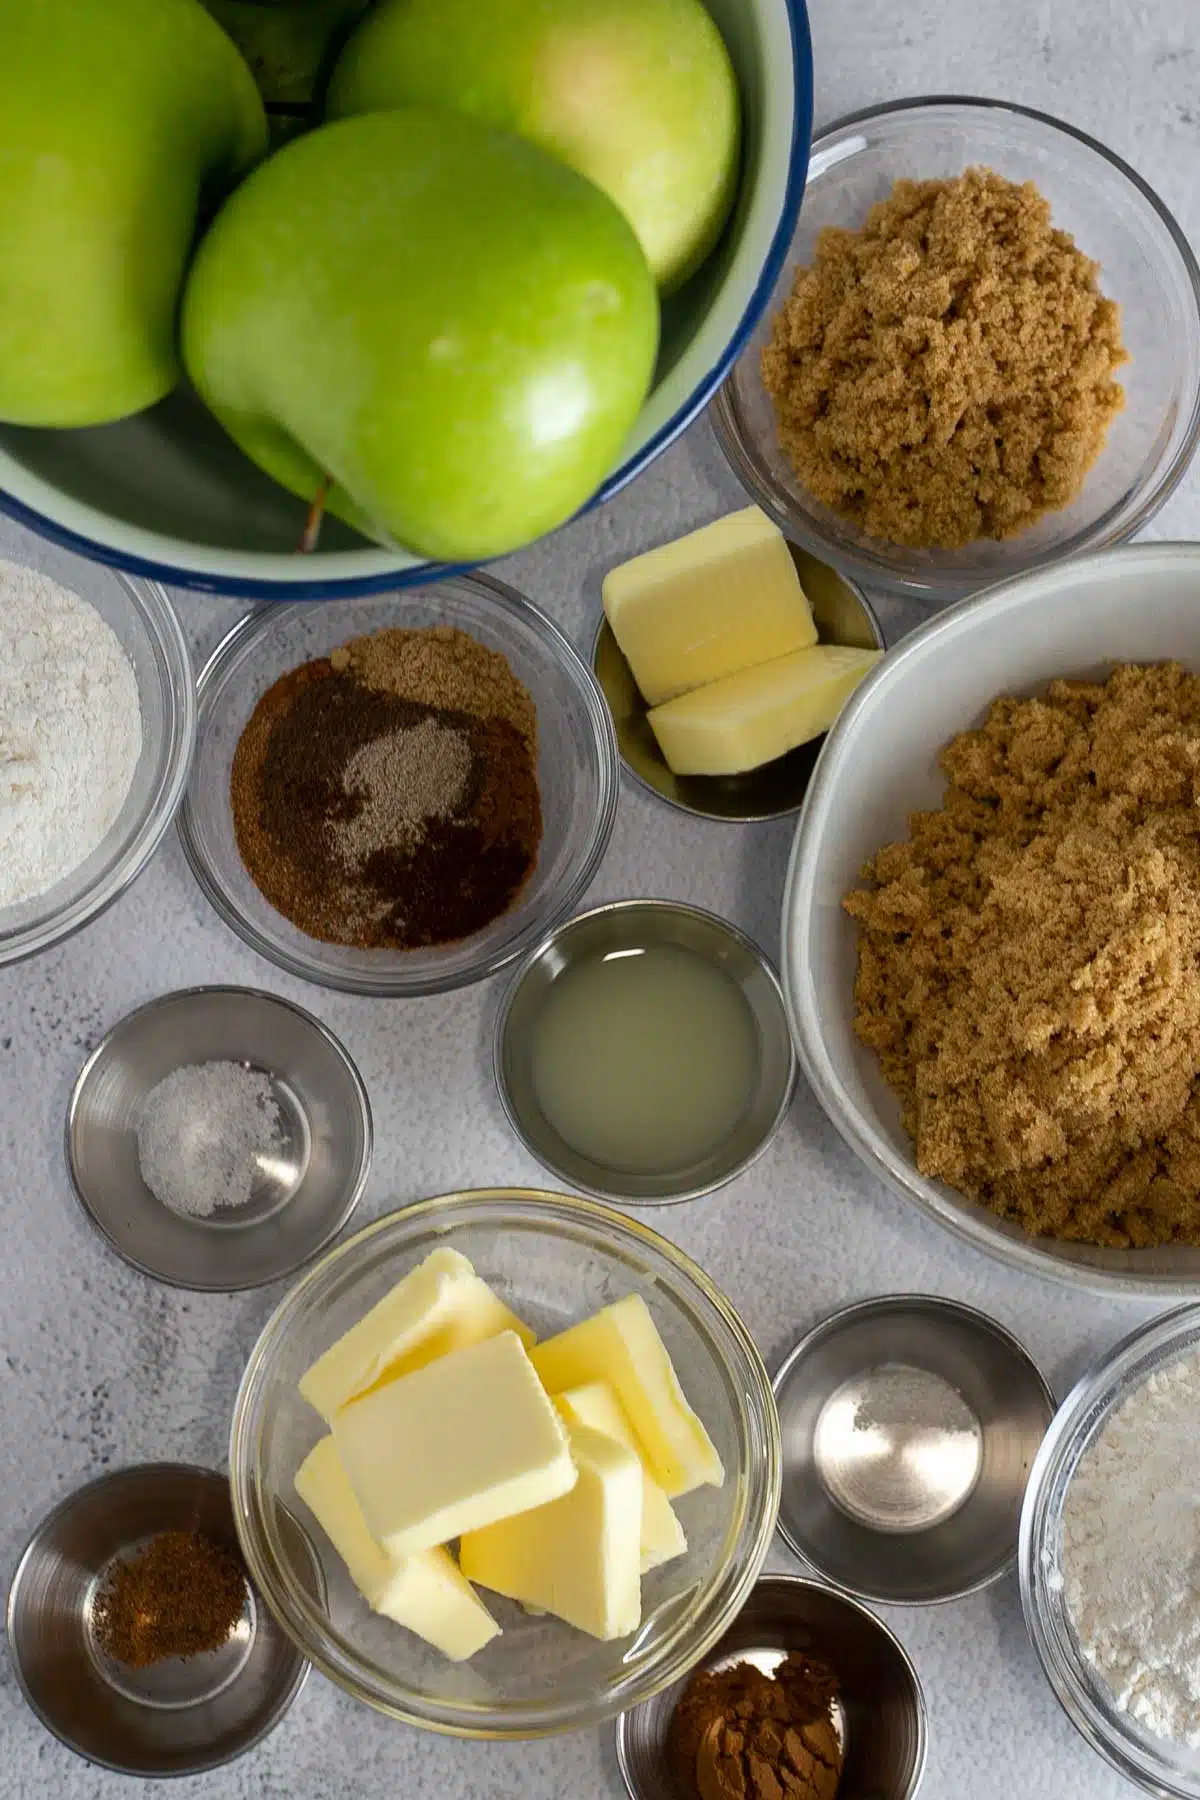 Tall image showing dutch apple pie ingredients.